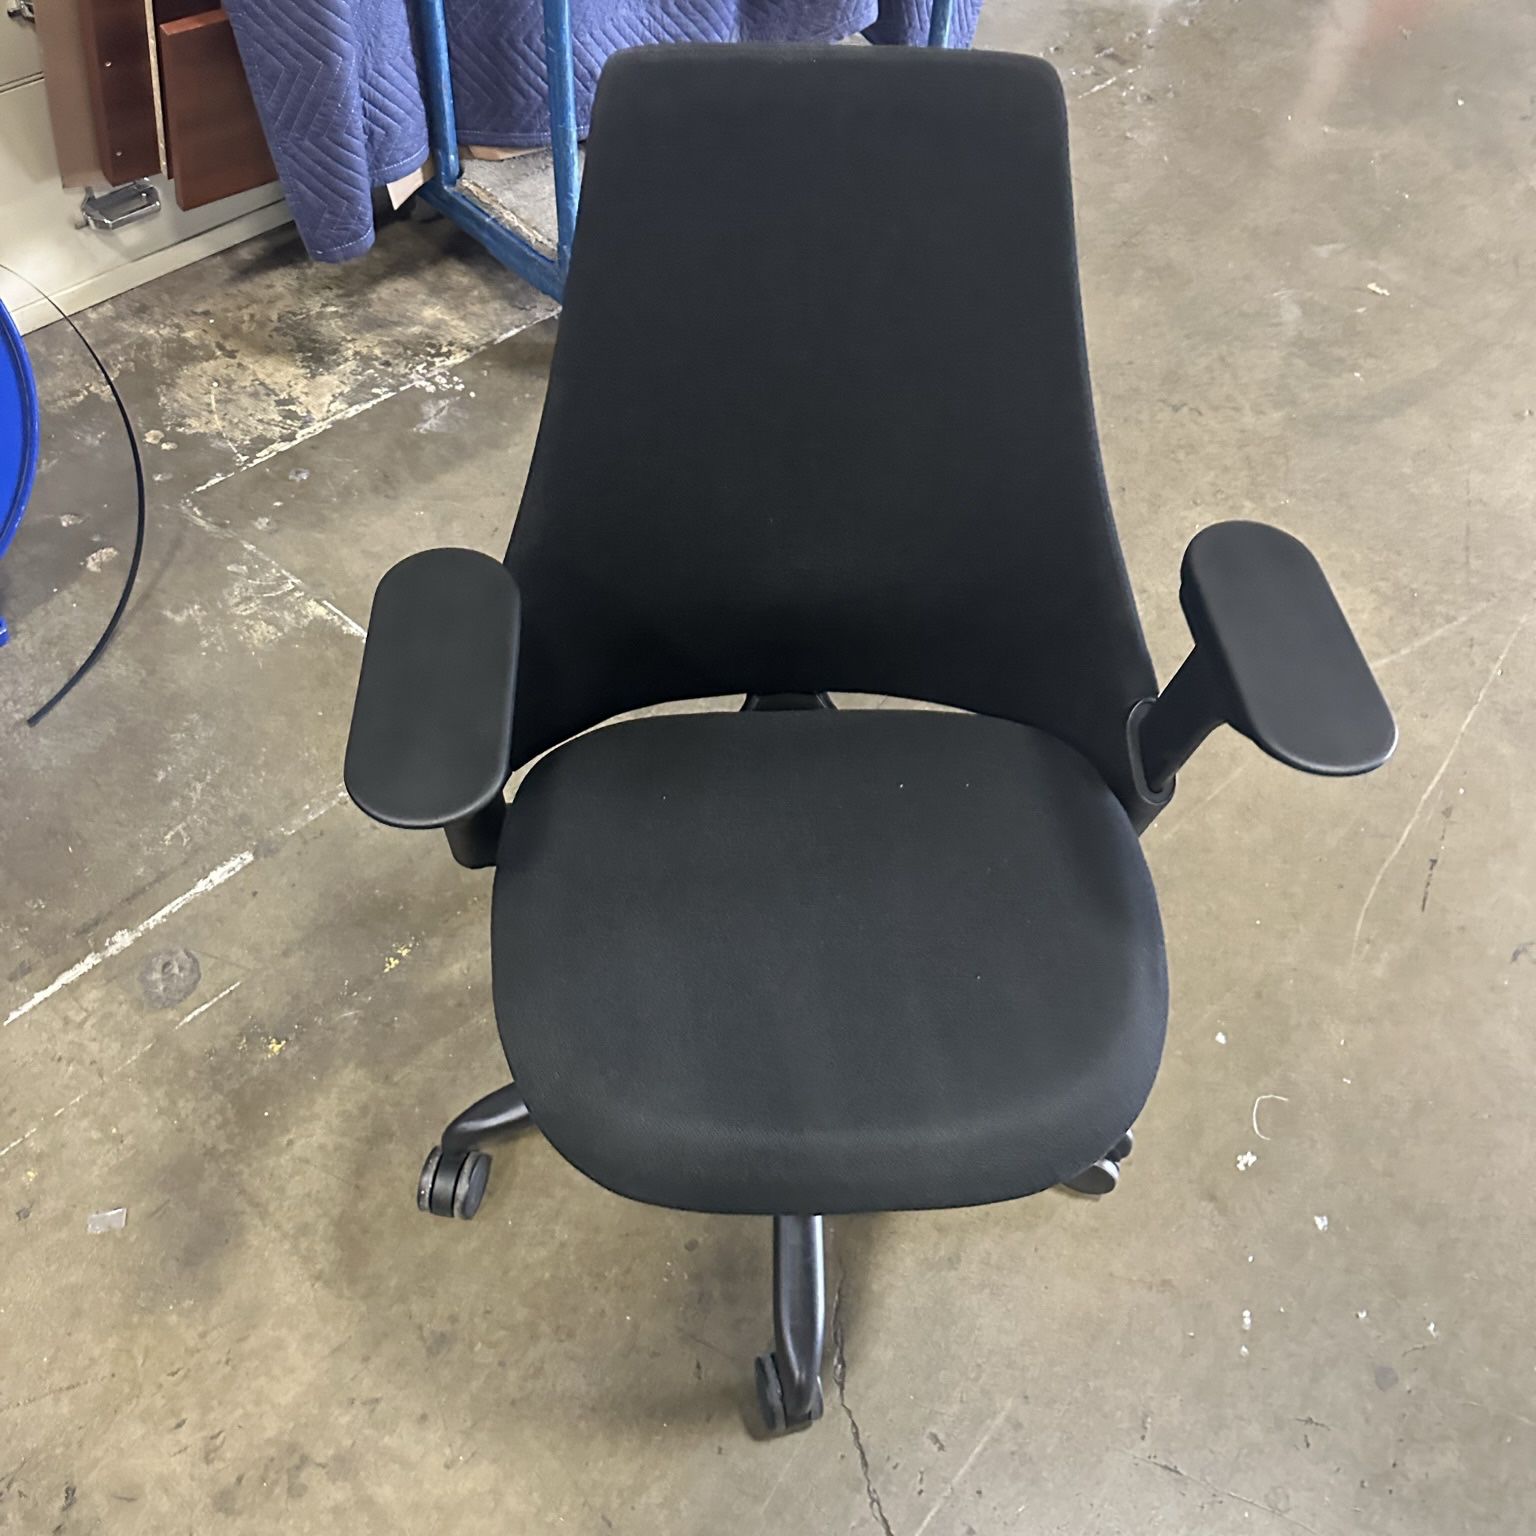 Upholstered High Back Herman Miller Sayl Chair! Fully Loaded! We Also Have Standing Desks, Monitor Arms, And More!!